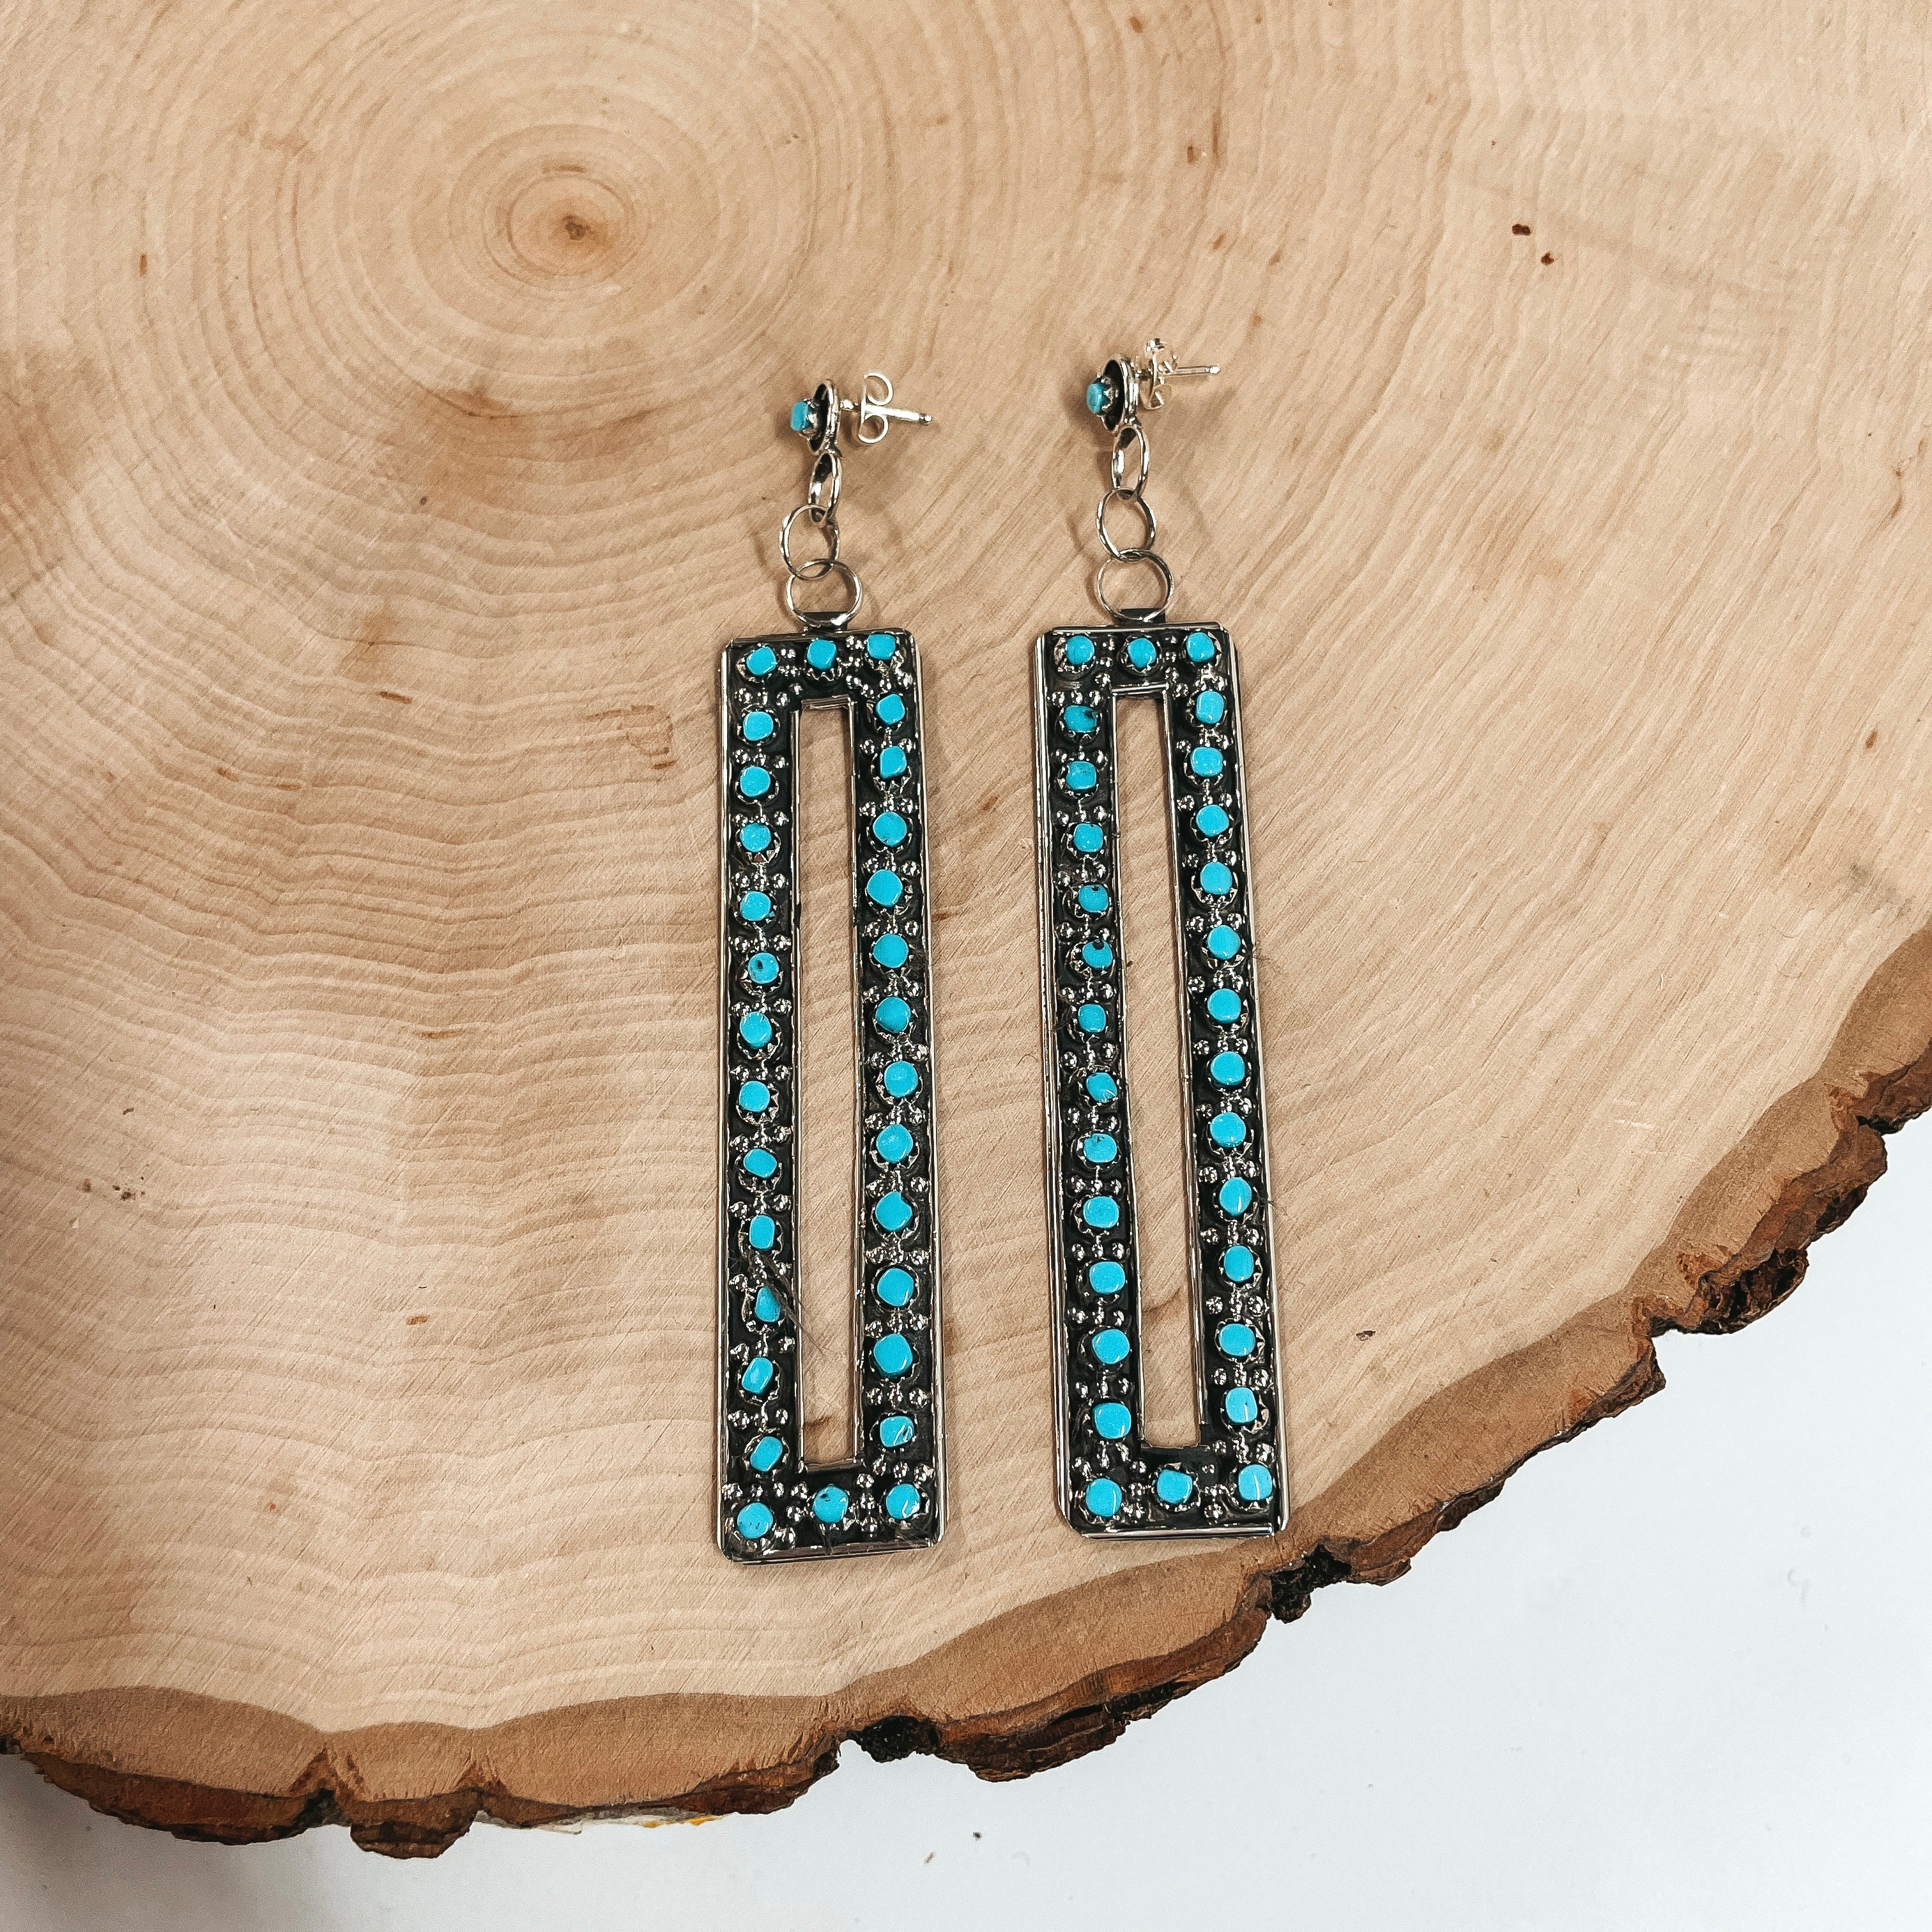 Zuni  | Zuni Handmade Sterling Silver Rectangle Post Stud and Dangle Earrings with Turquoise Stones - Giddy Up Glamour Boutique